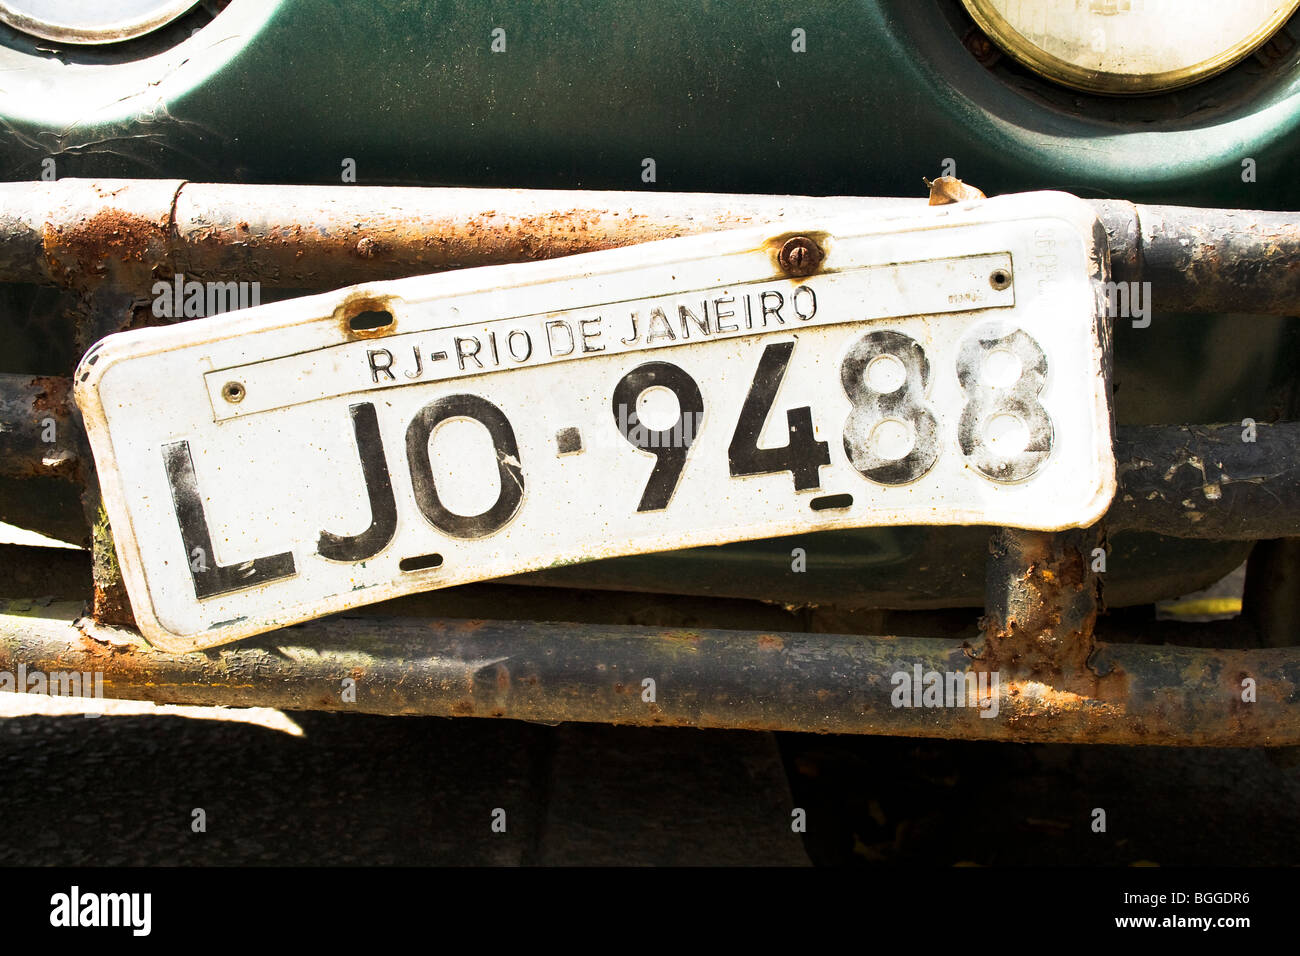 A Rio de Janeiro numberplate hangs loose on the rusting bumber of one of the thousands of Beetles in South America Stock Photo